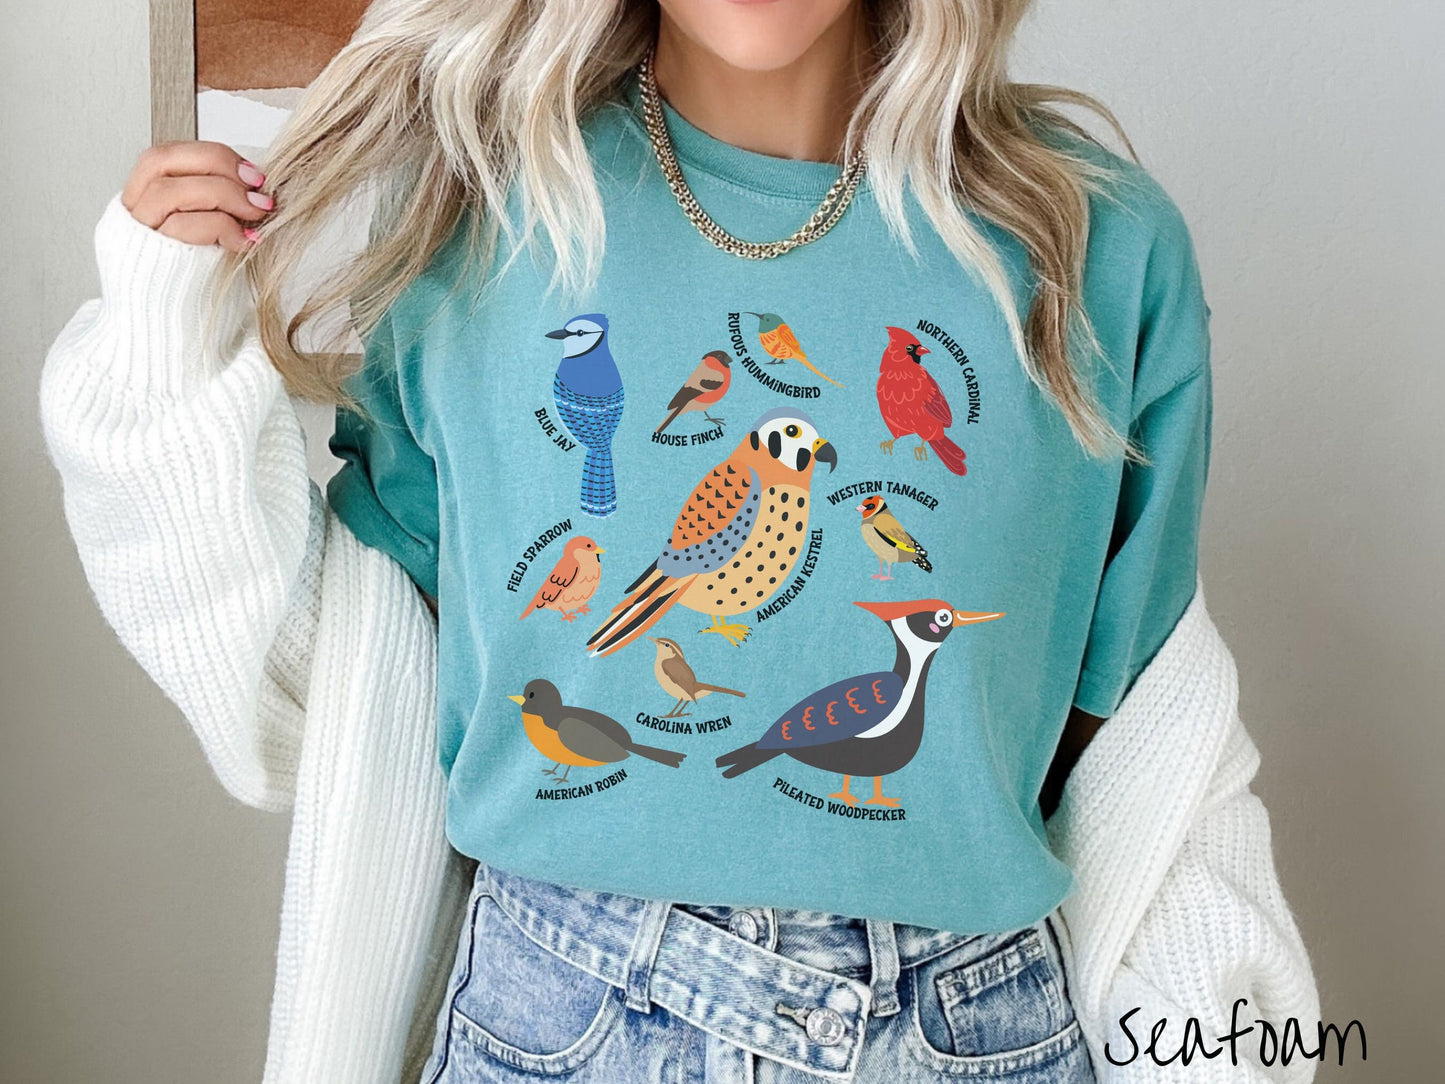 A woman wearing a cute, vintage seafoam colored Comfort Colors shirt with pictures of nine different bird species and their names listed across the front. Some examples are the Blue Jay, House Finch, Western Tanager, and Carolina Wren.